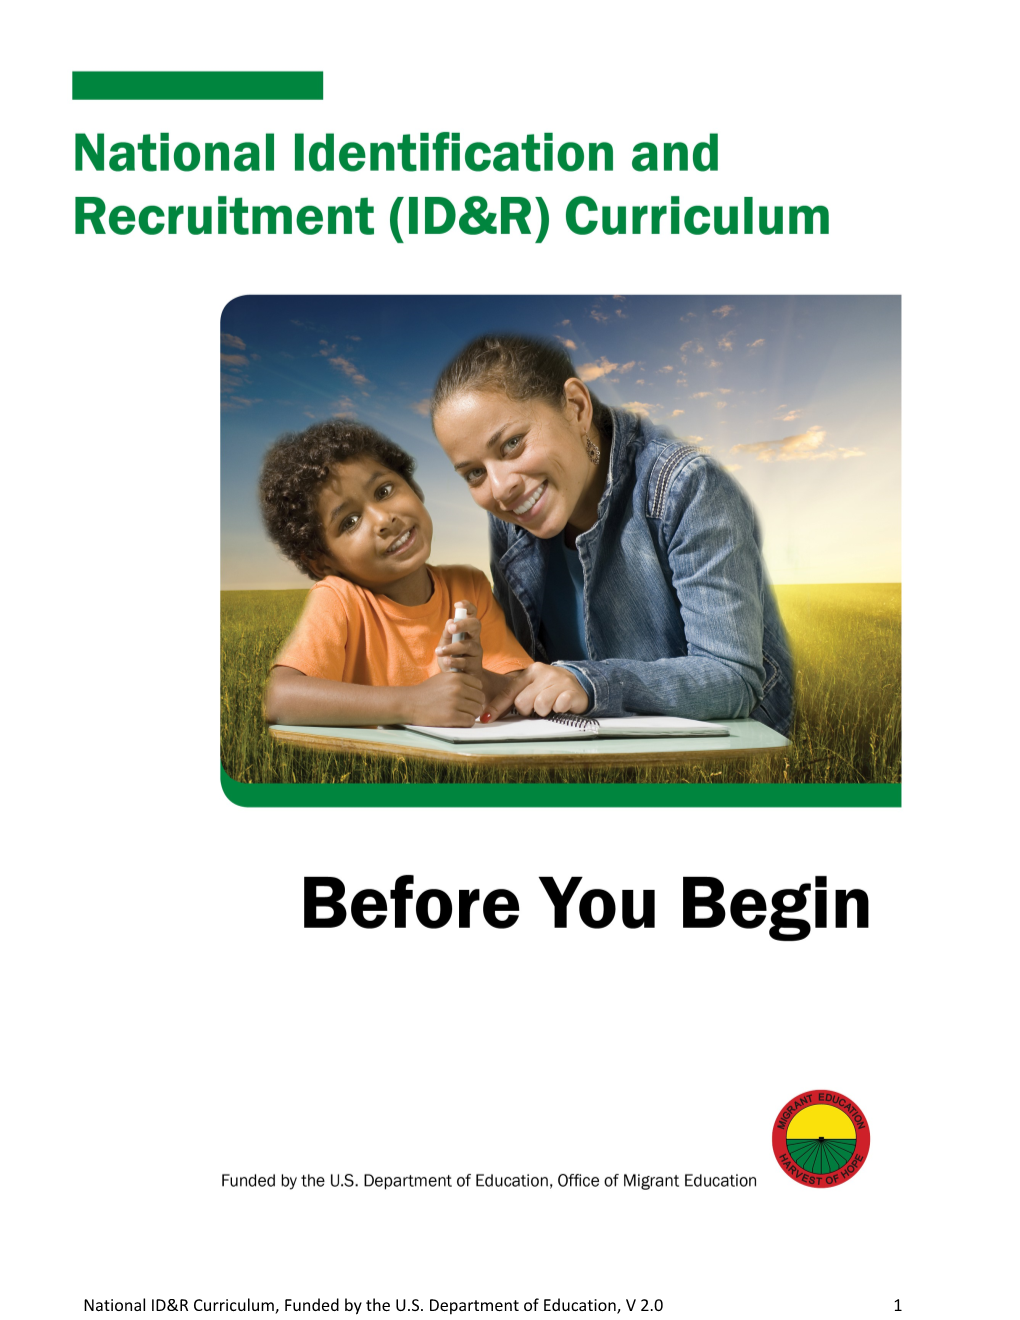 National ID&R Curriculum, Funded by the U.S. Department of Education, V 2.01